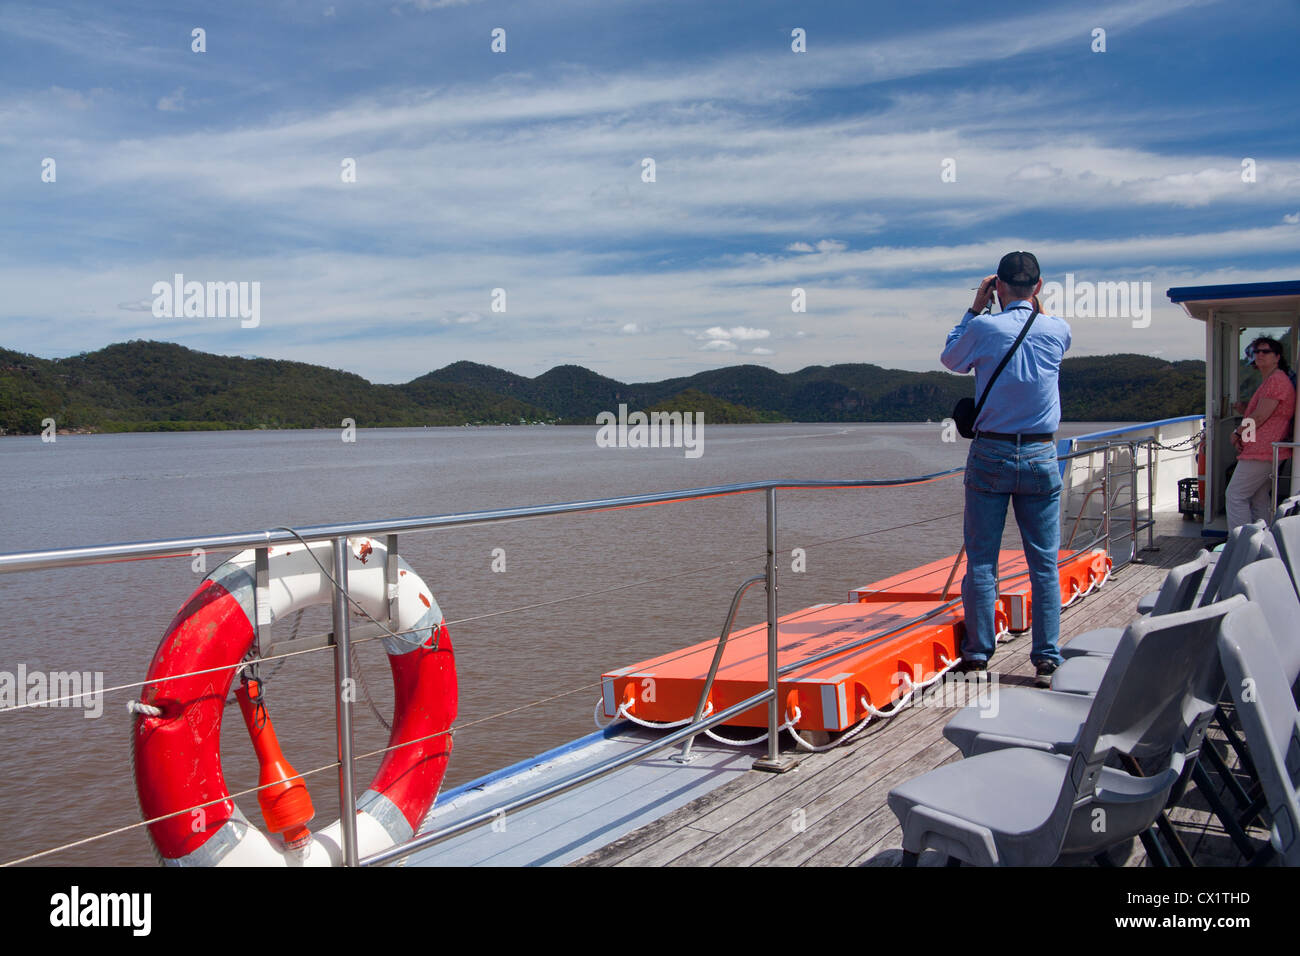 Boat trip on the Hawkesbury Riverboat Postman, with man looking through binoculars New South Wales (NSW) Australia Stock Photo